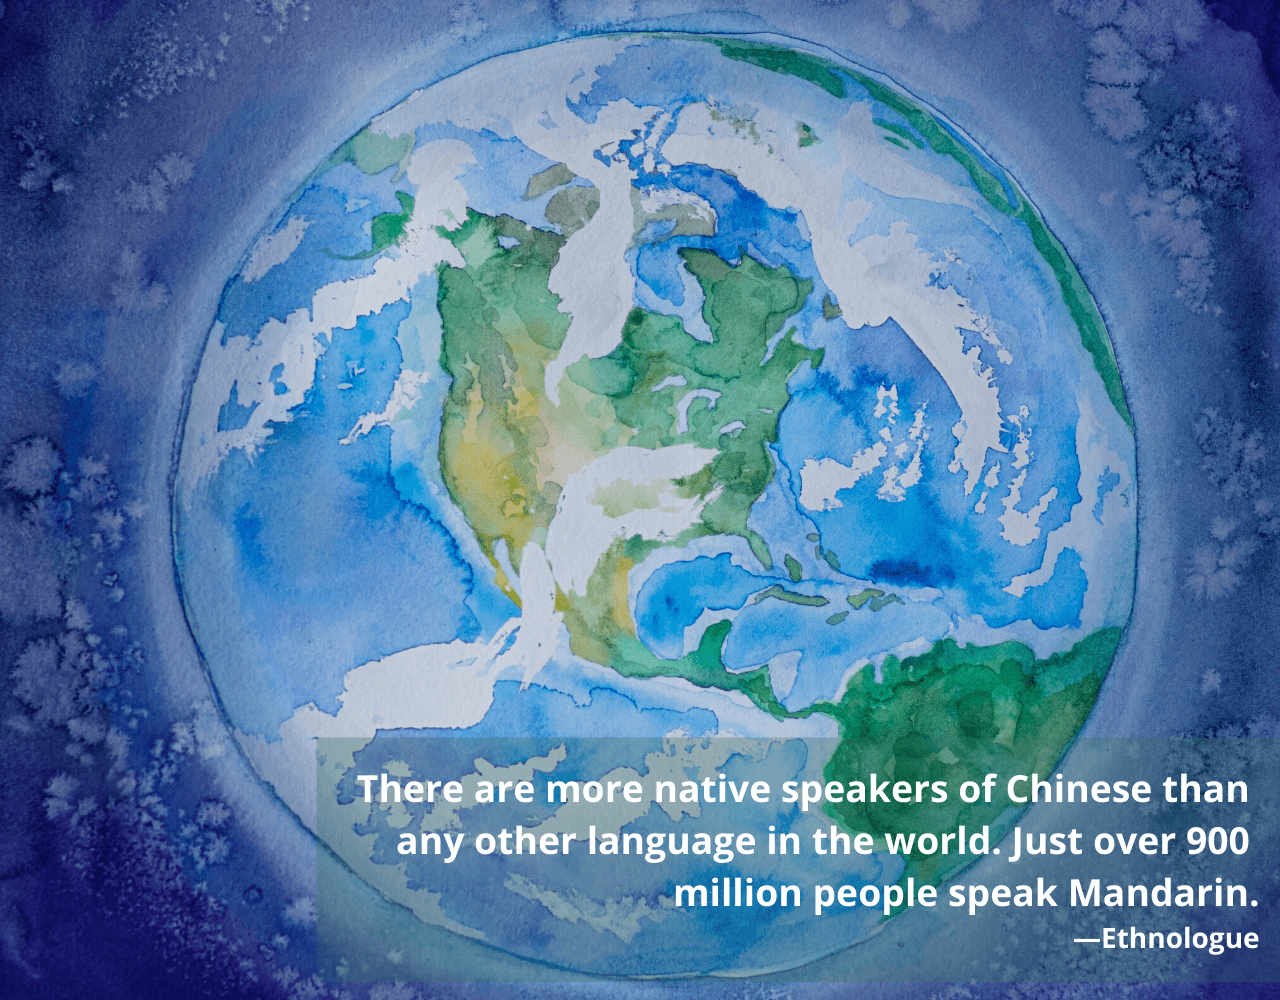 Chinese has the most native speakers of any language in the world